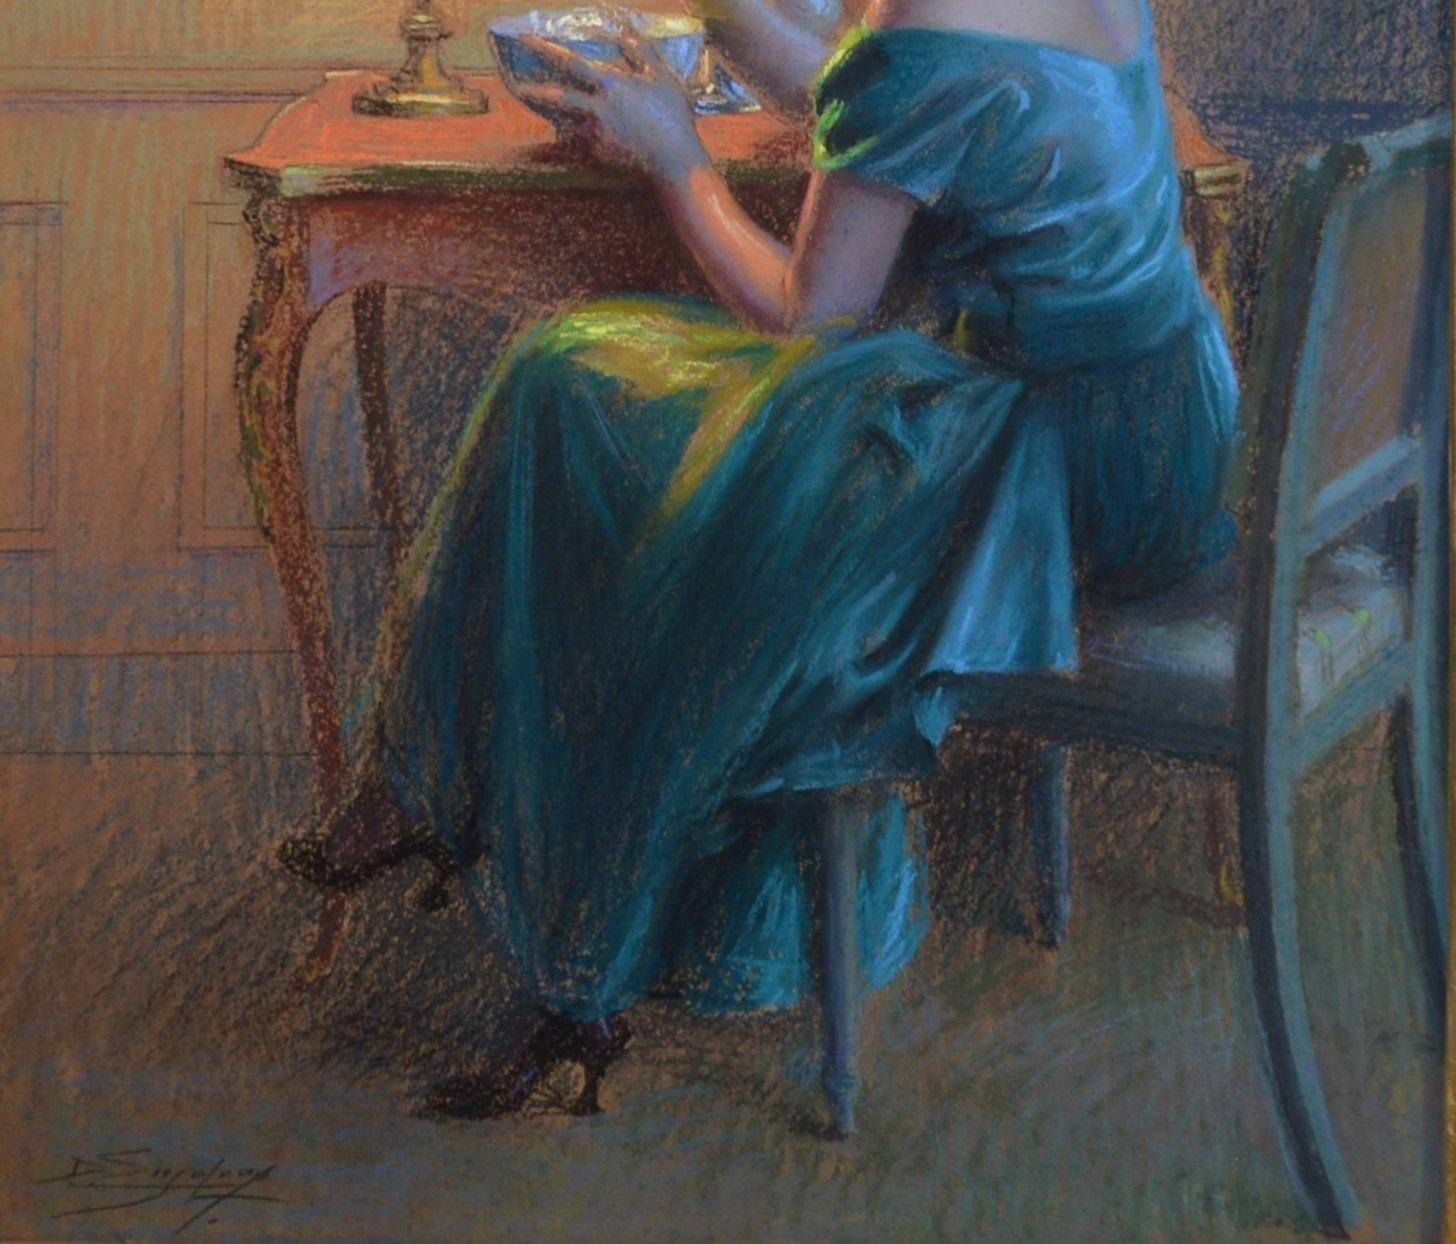 Soap Bubbles - Antique Painting of Belle Epoque Beauty by Tiffany Lamplight - Brown Figurative Painting by Delphin Enjolras